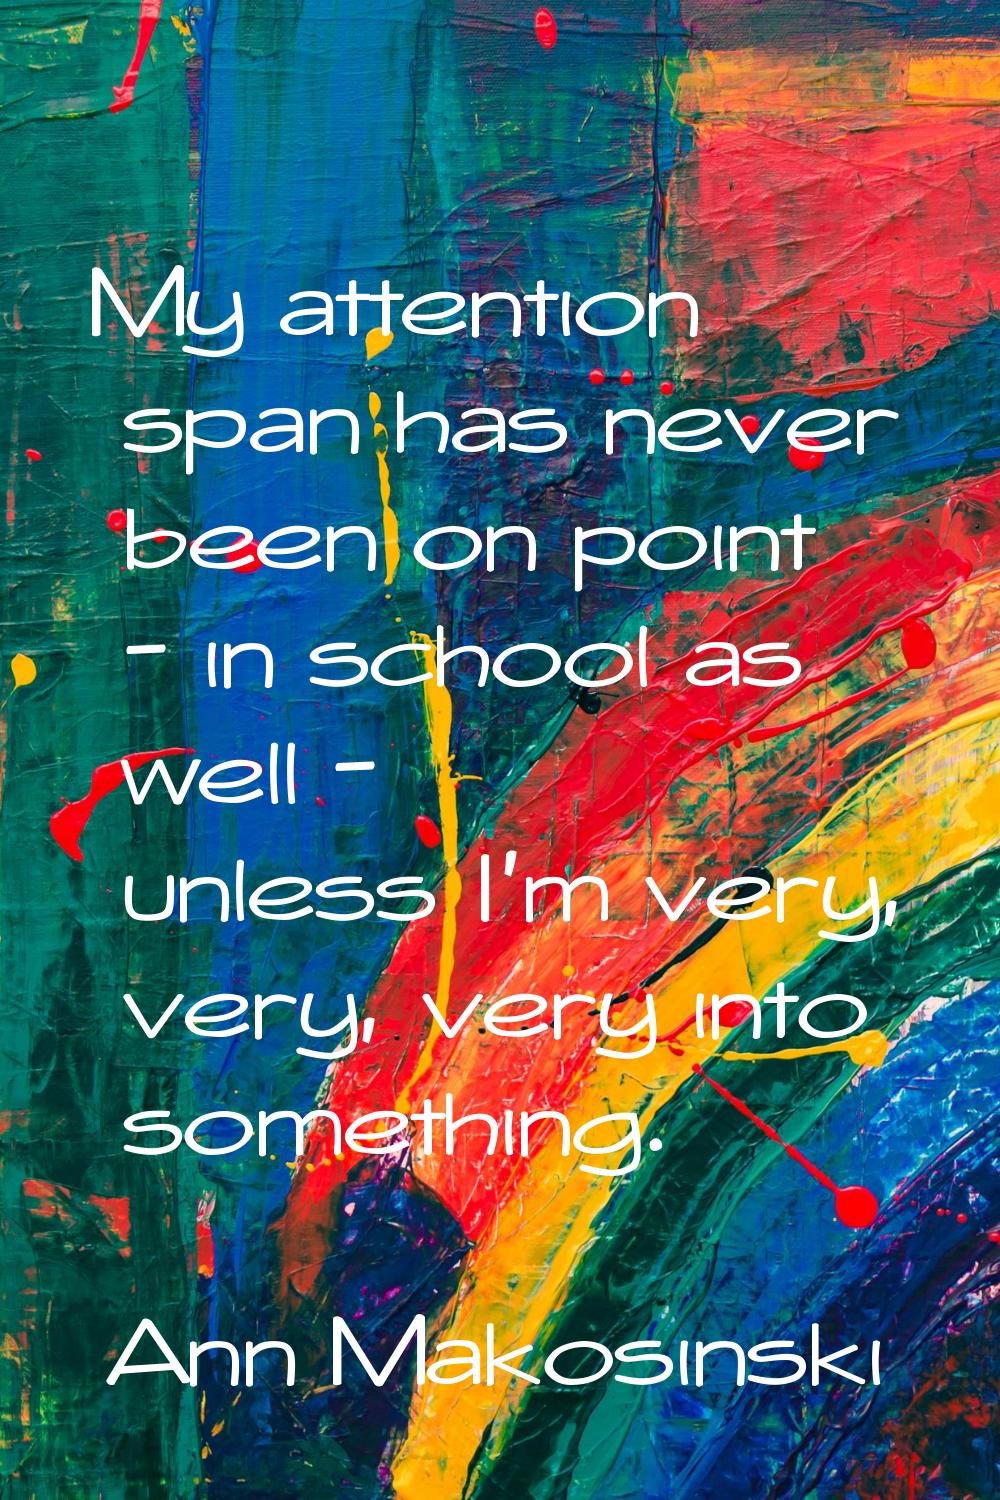 My attention span has never been on point - in school as well - unless I'm very, very, very into so